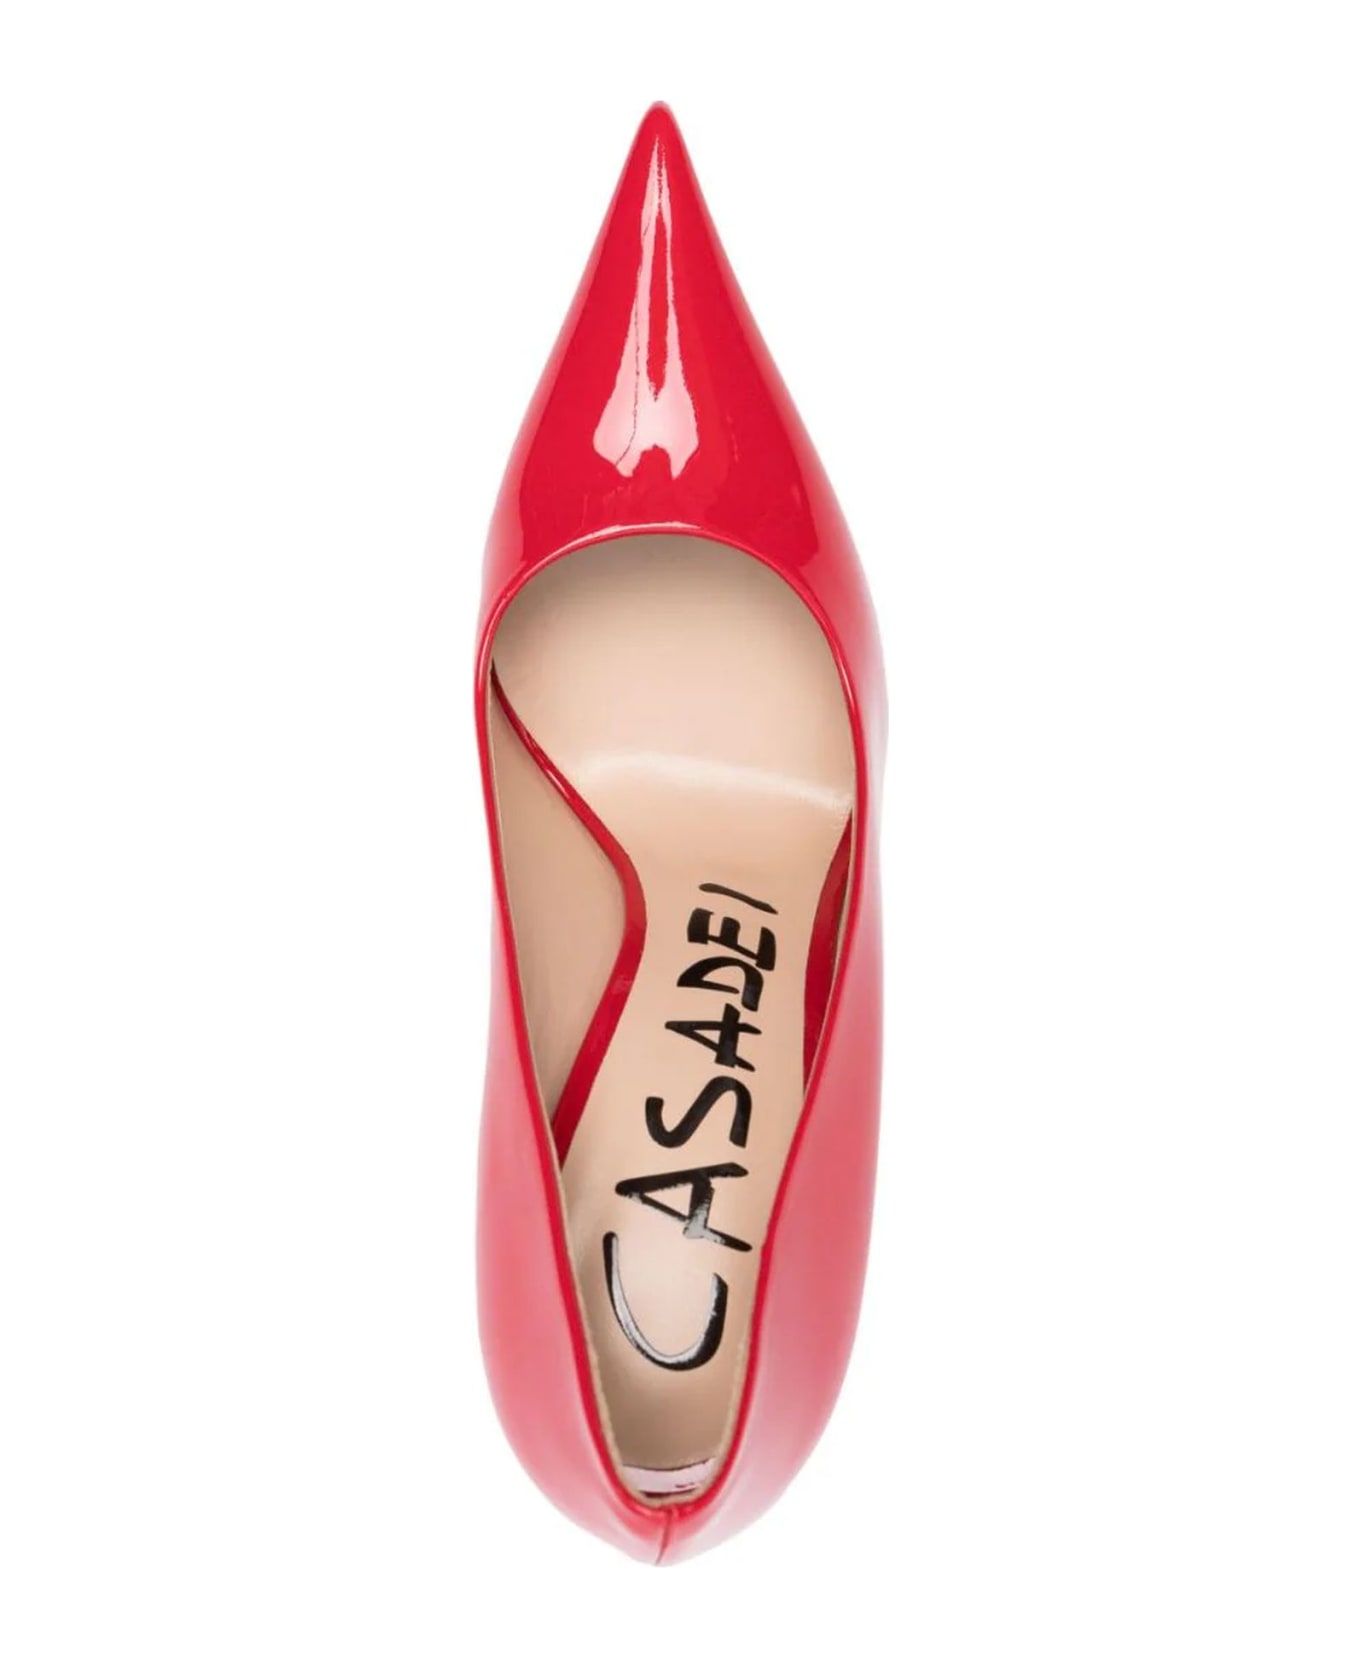 Casadei Bright Red Calf Leather Pumps - Red ハイヒール